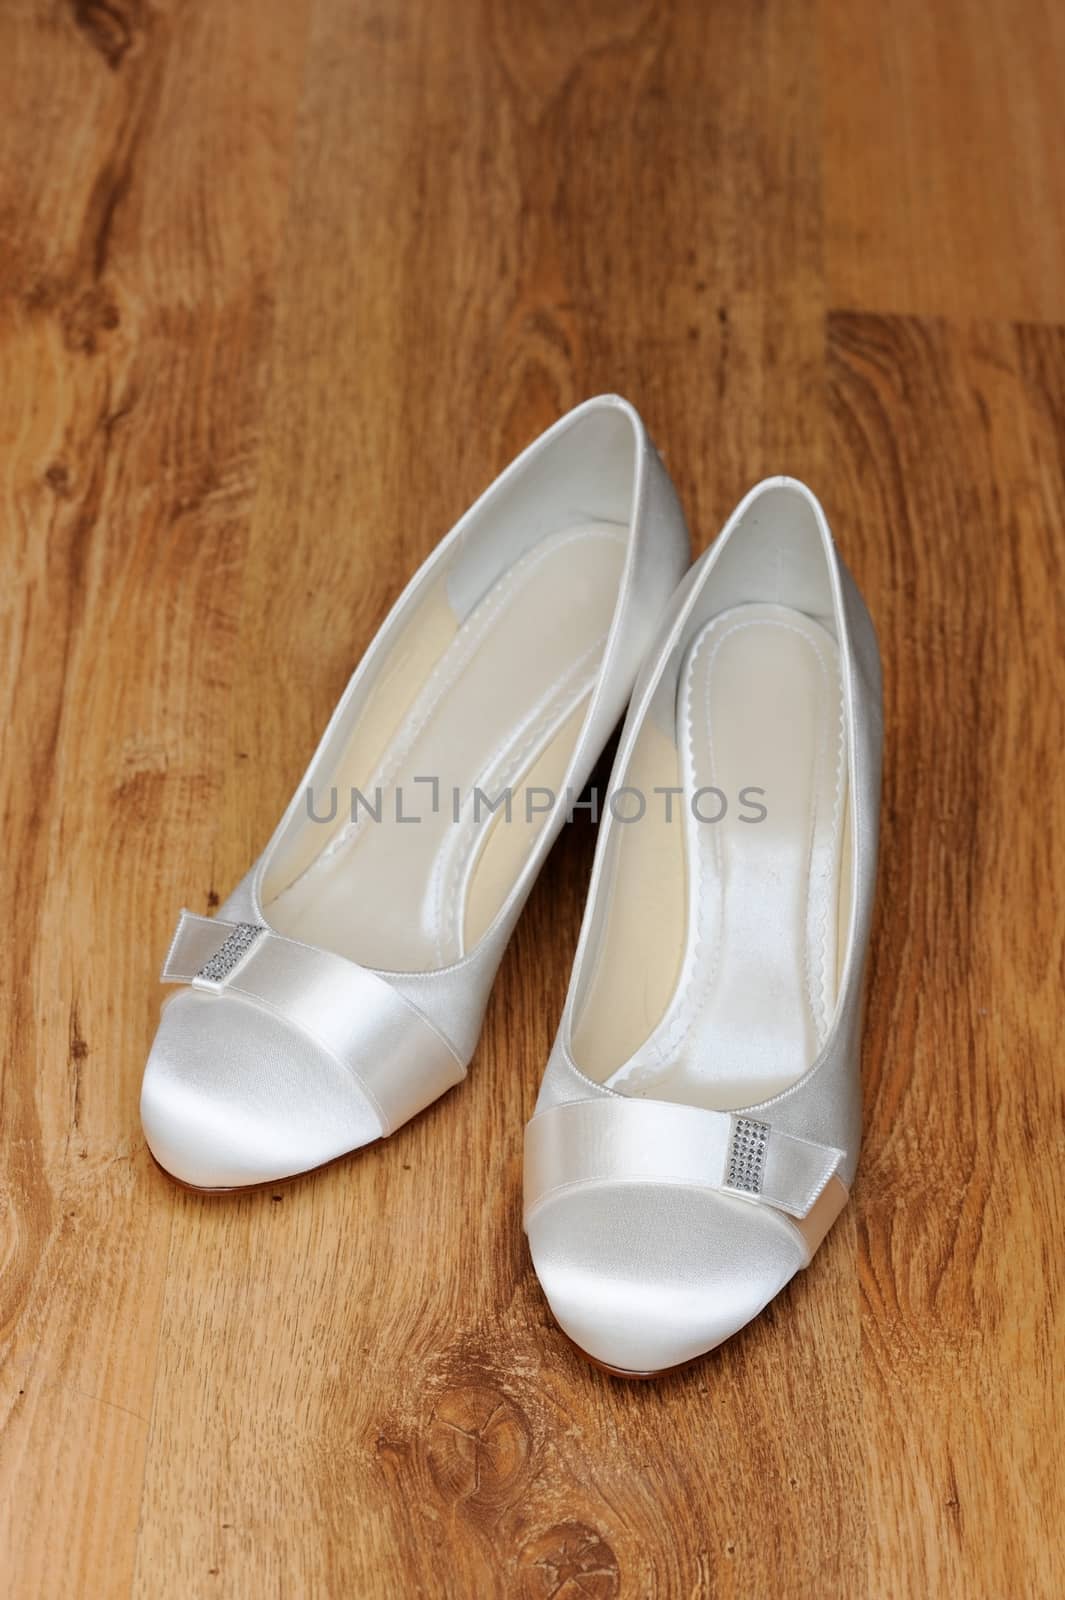 Brides shoes with wood background